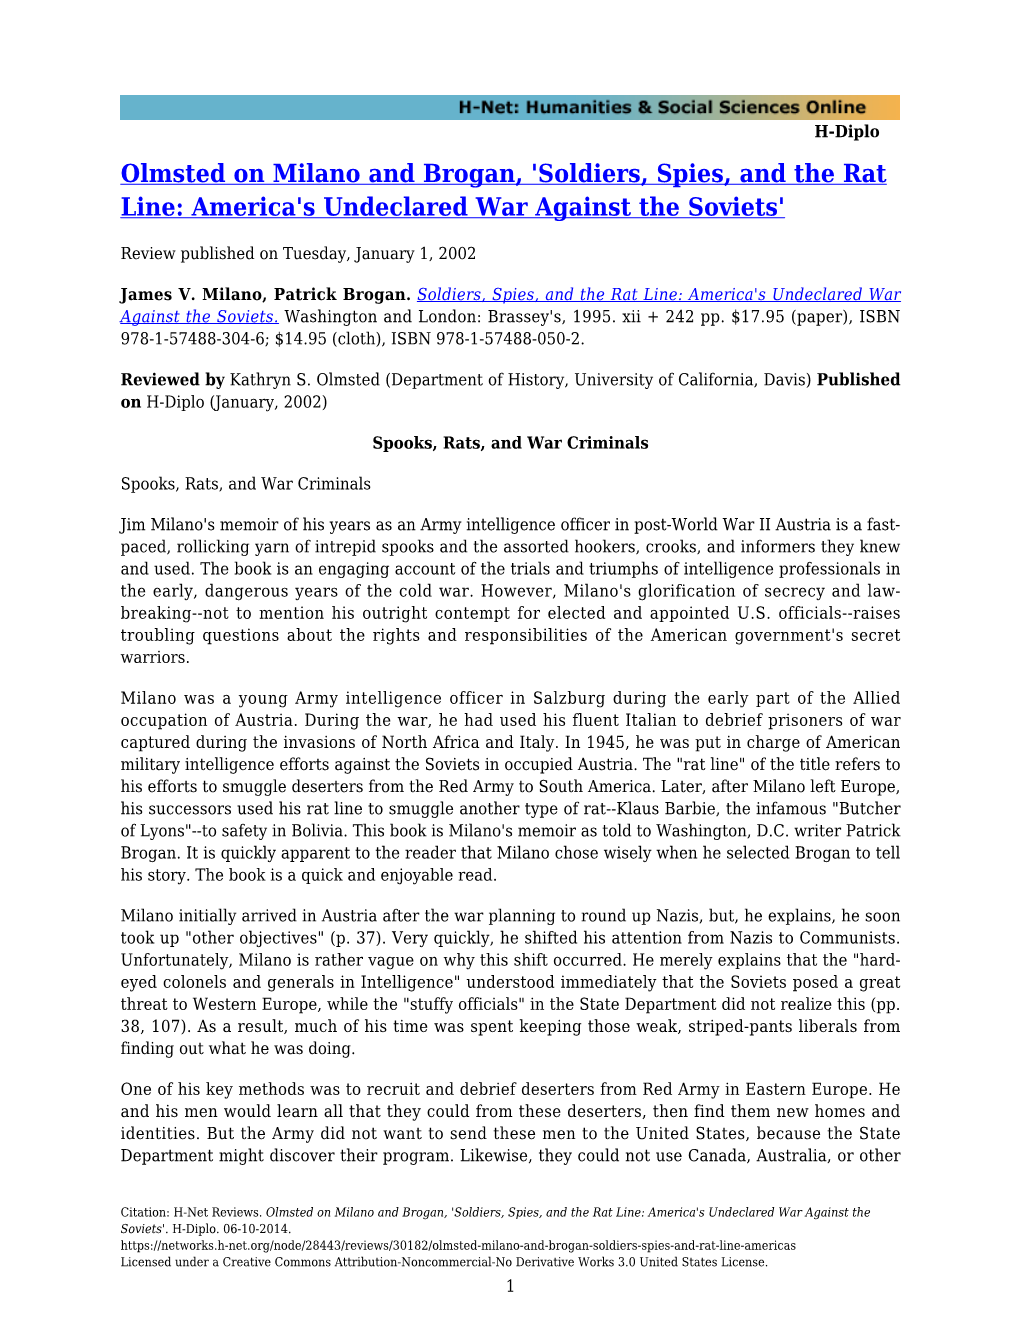 'Soldiers, Spies, and the Rat Line: America's Undeclared War Against the Soviets'